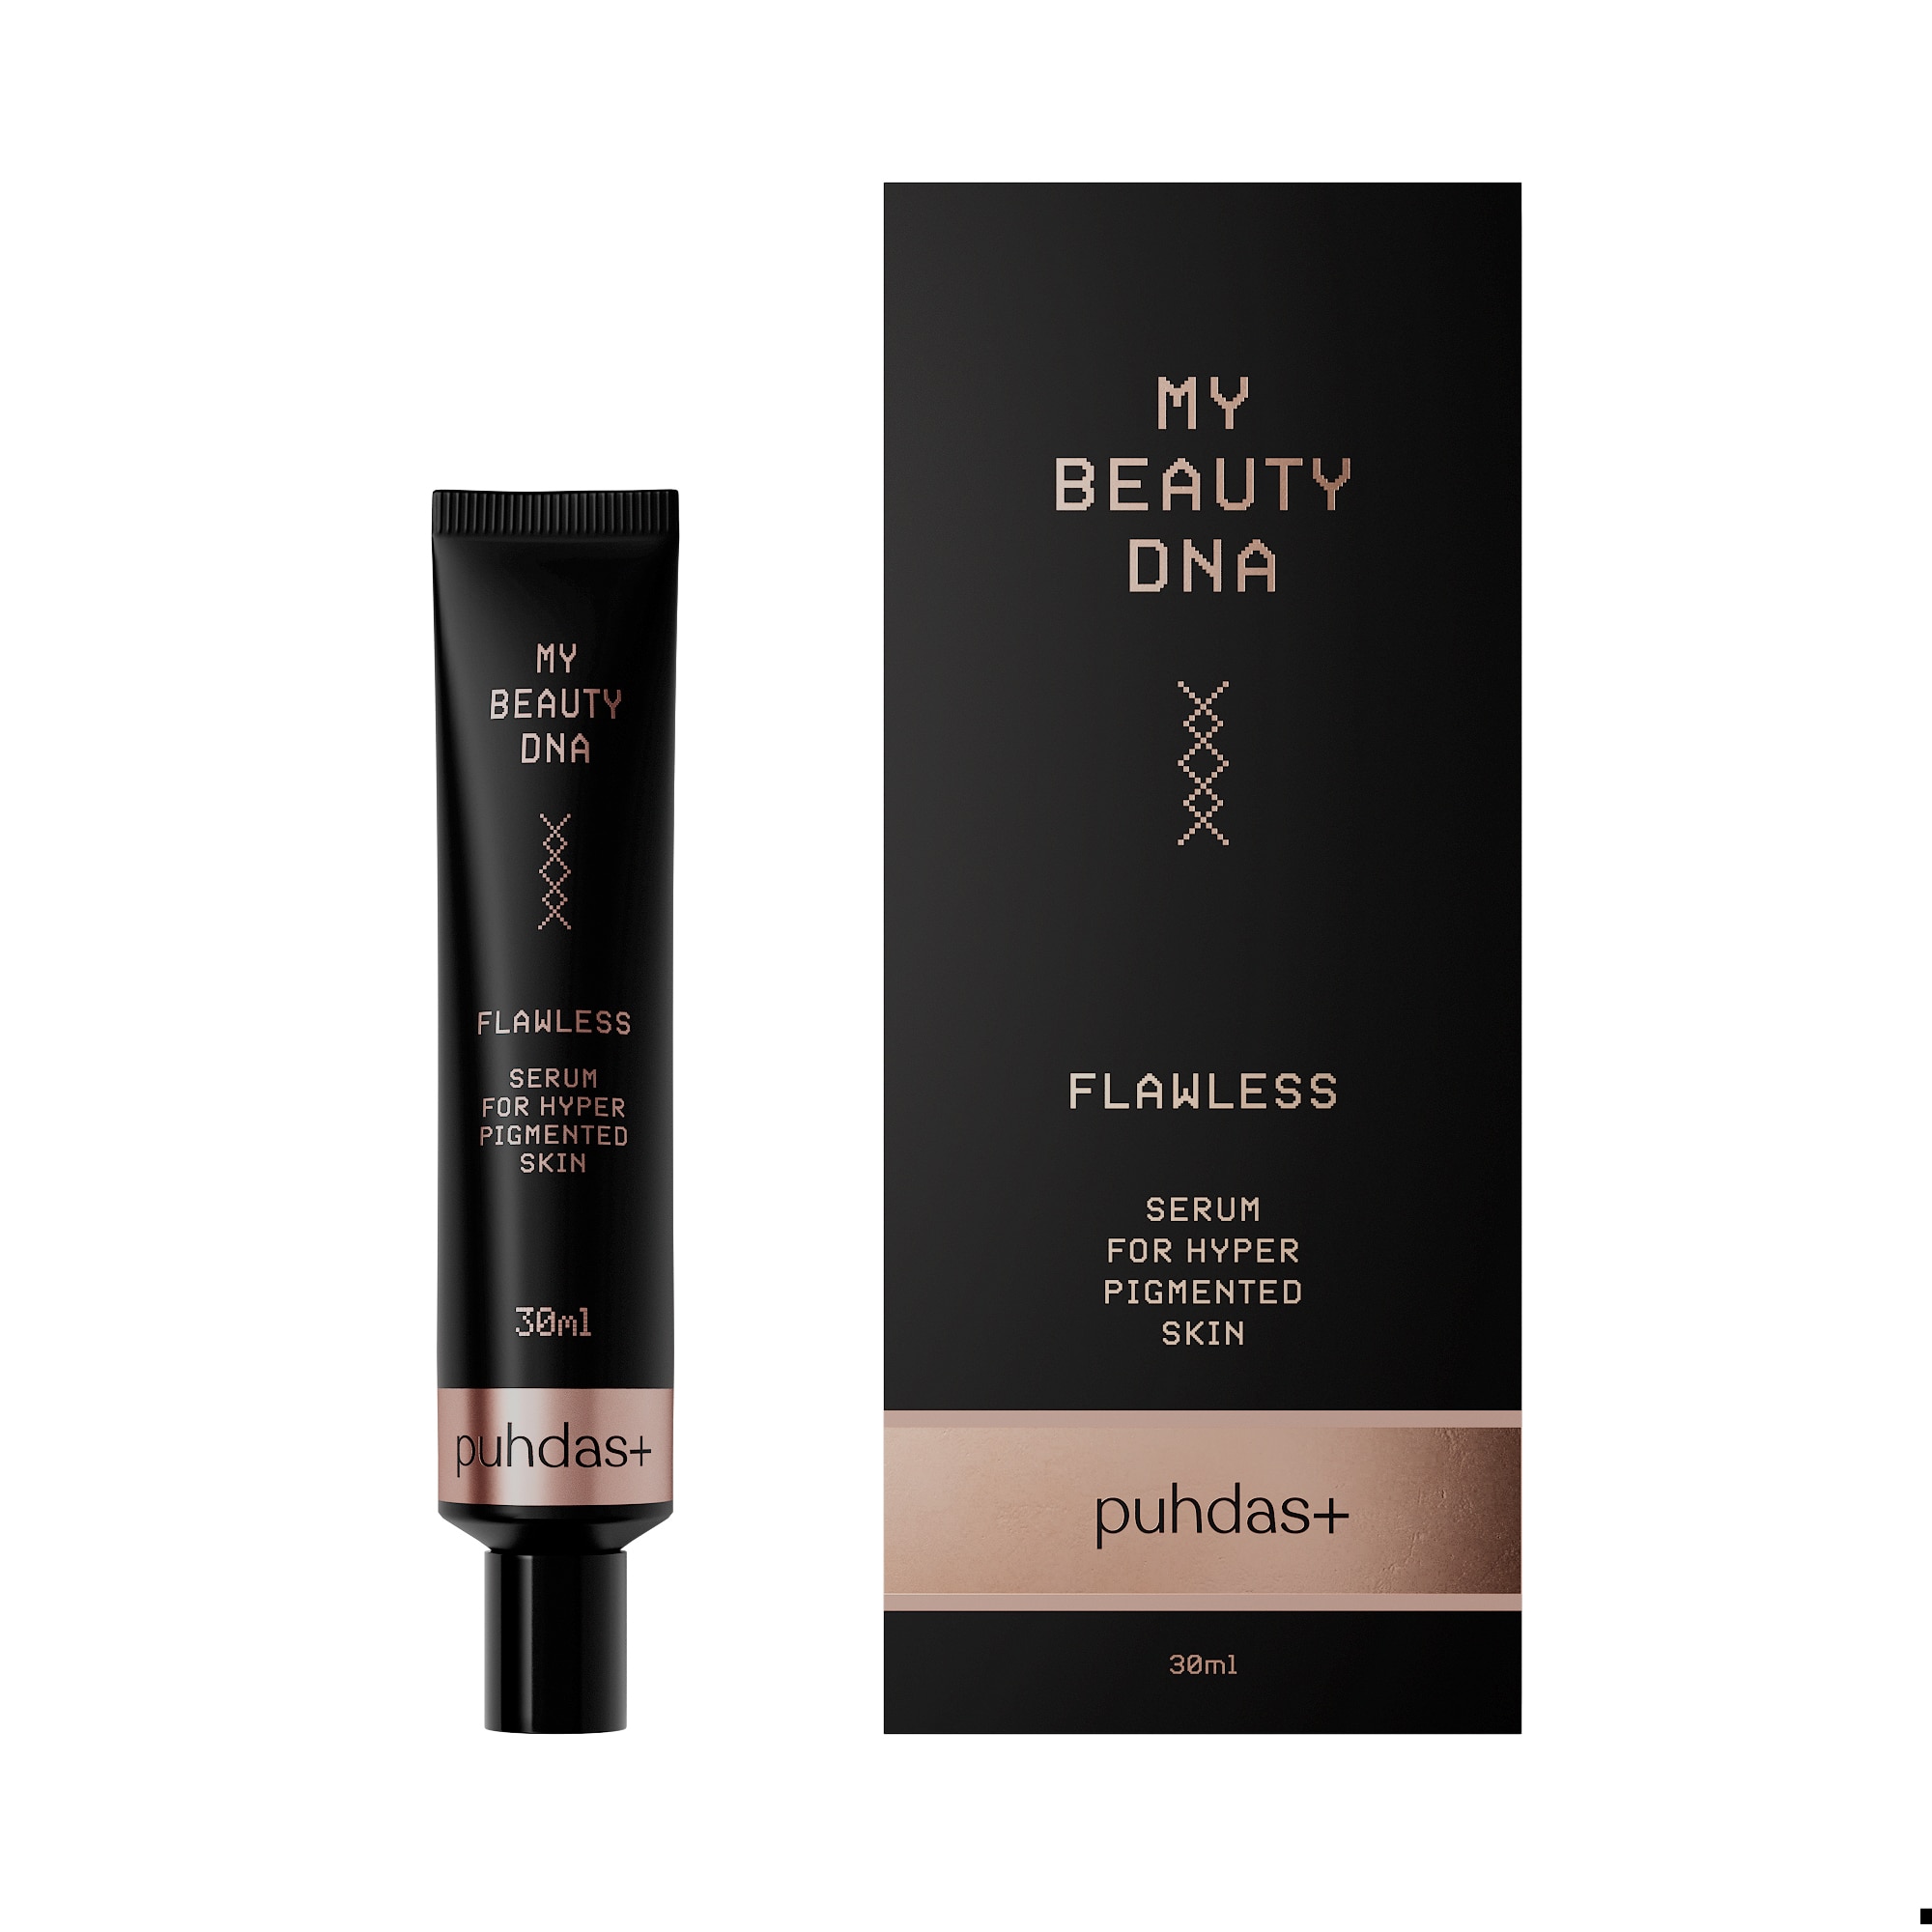 Puhdas+ Beauty DNA Flawless Serum for Hyper Pigmented Skin